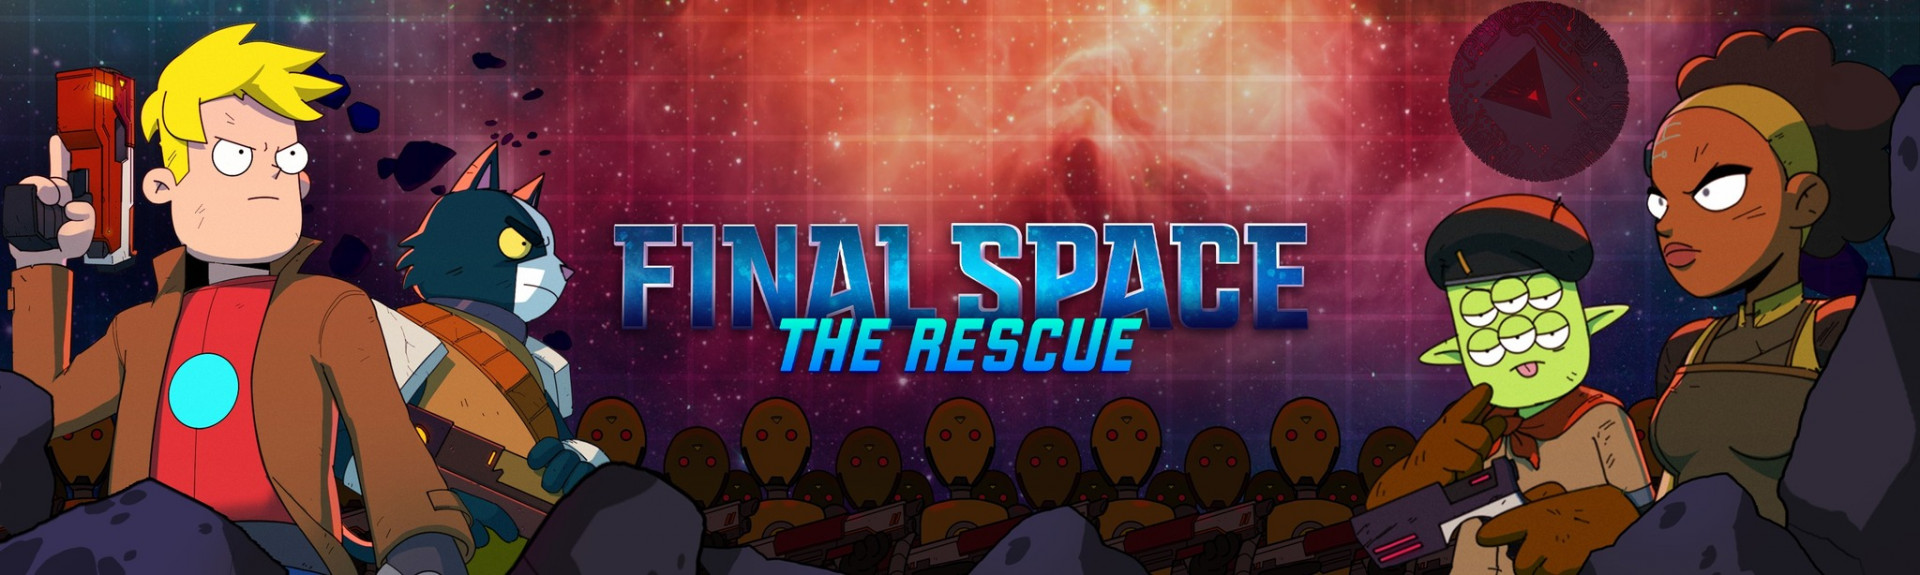 Final Space VR - The Rescue